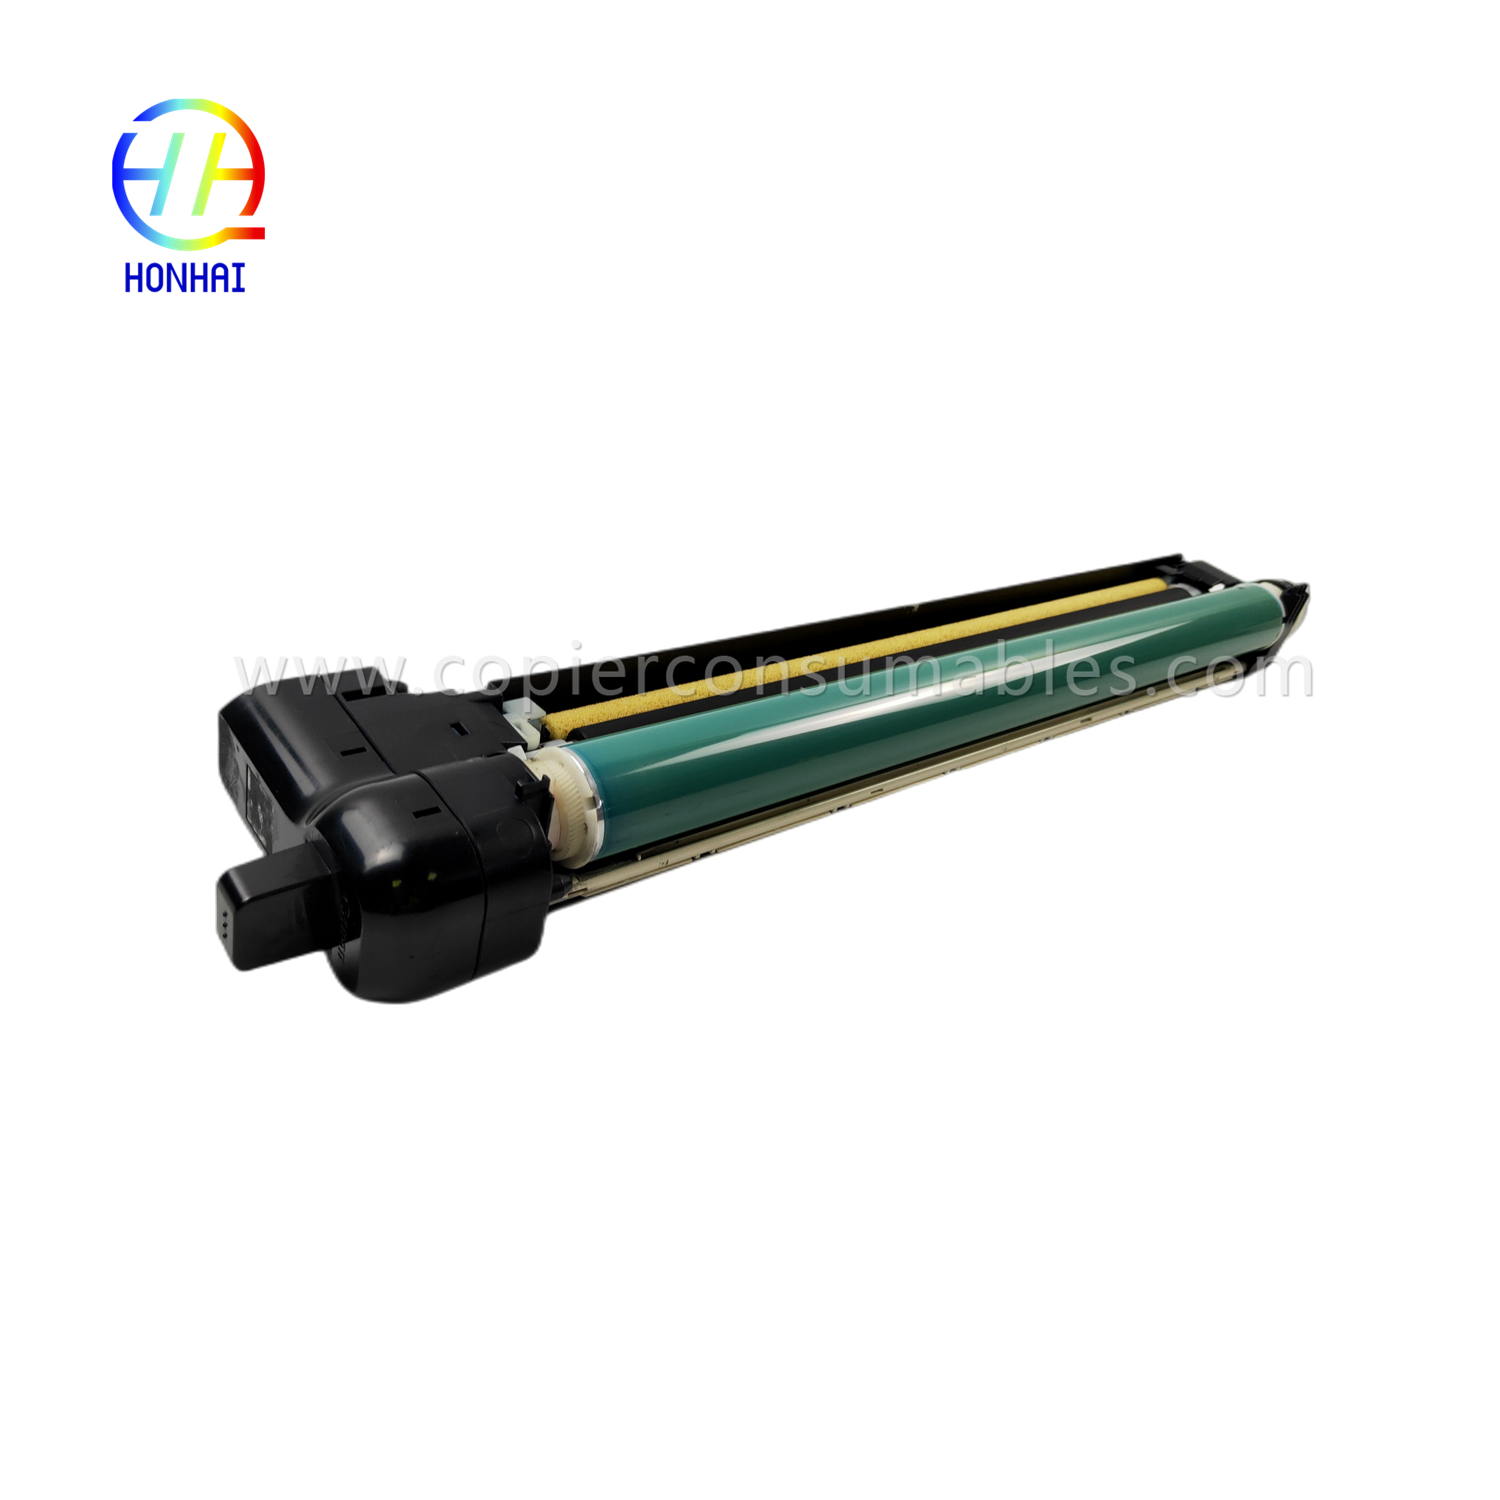 https://c585.goodao.net/drum-unit-for-canon-ir-c255if-c350p-c355if-c350if-product/